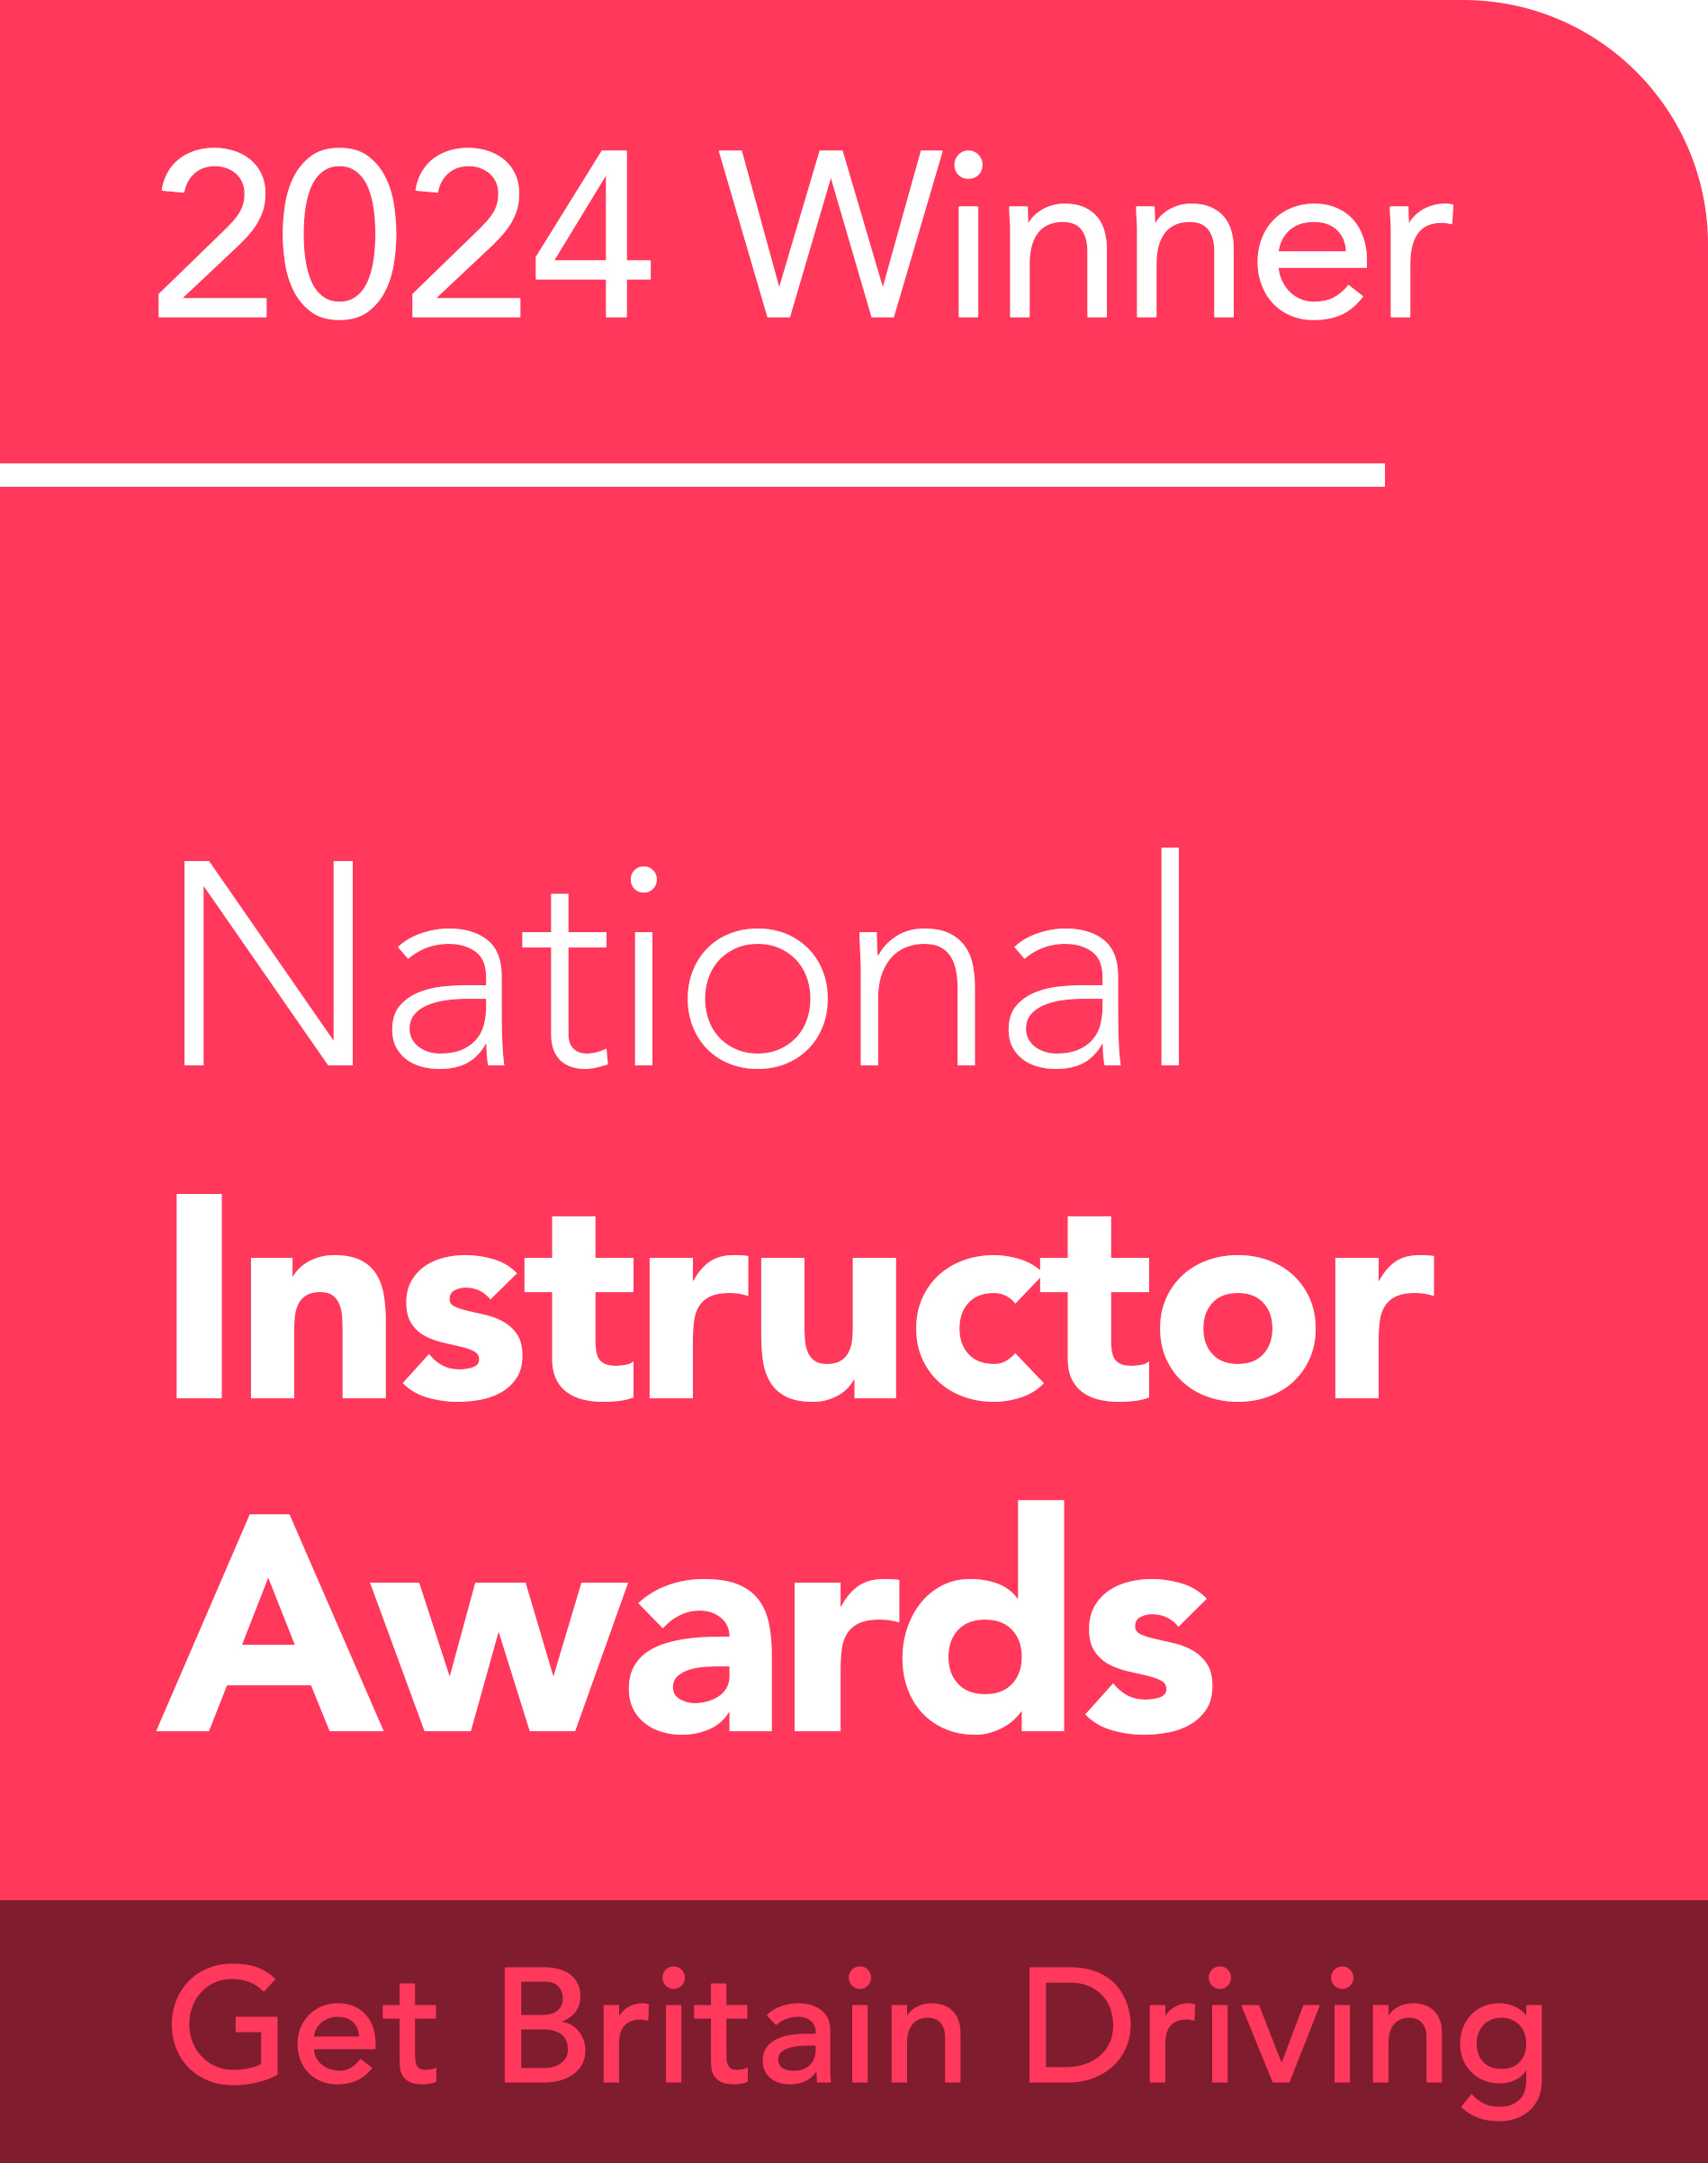 2024 Winner of the National Instructor of the Year Awards , Scotland.